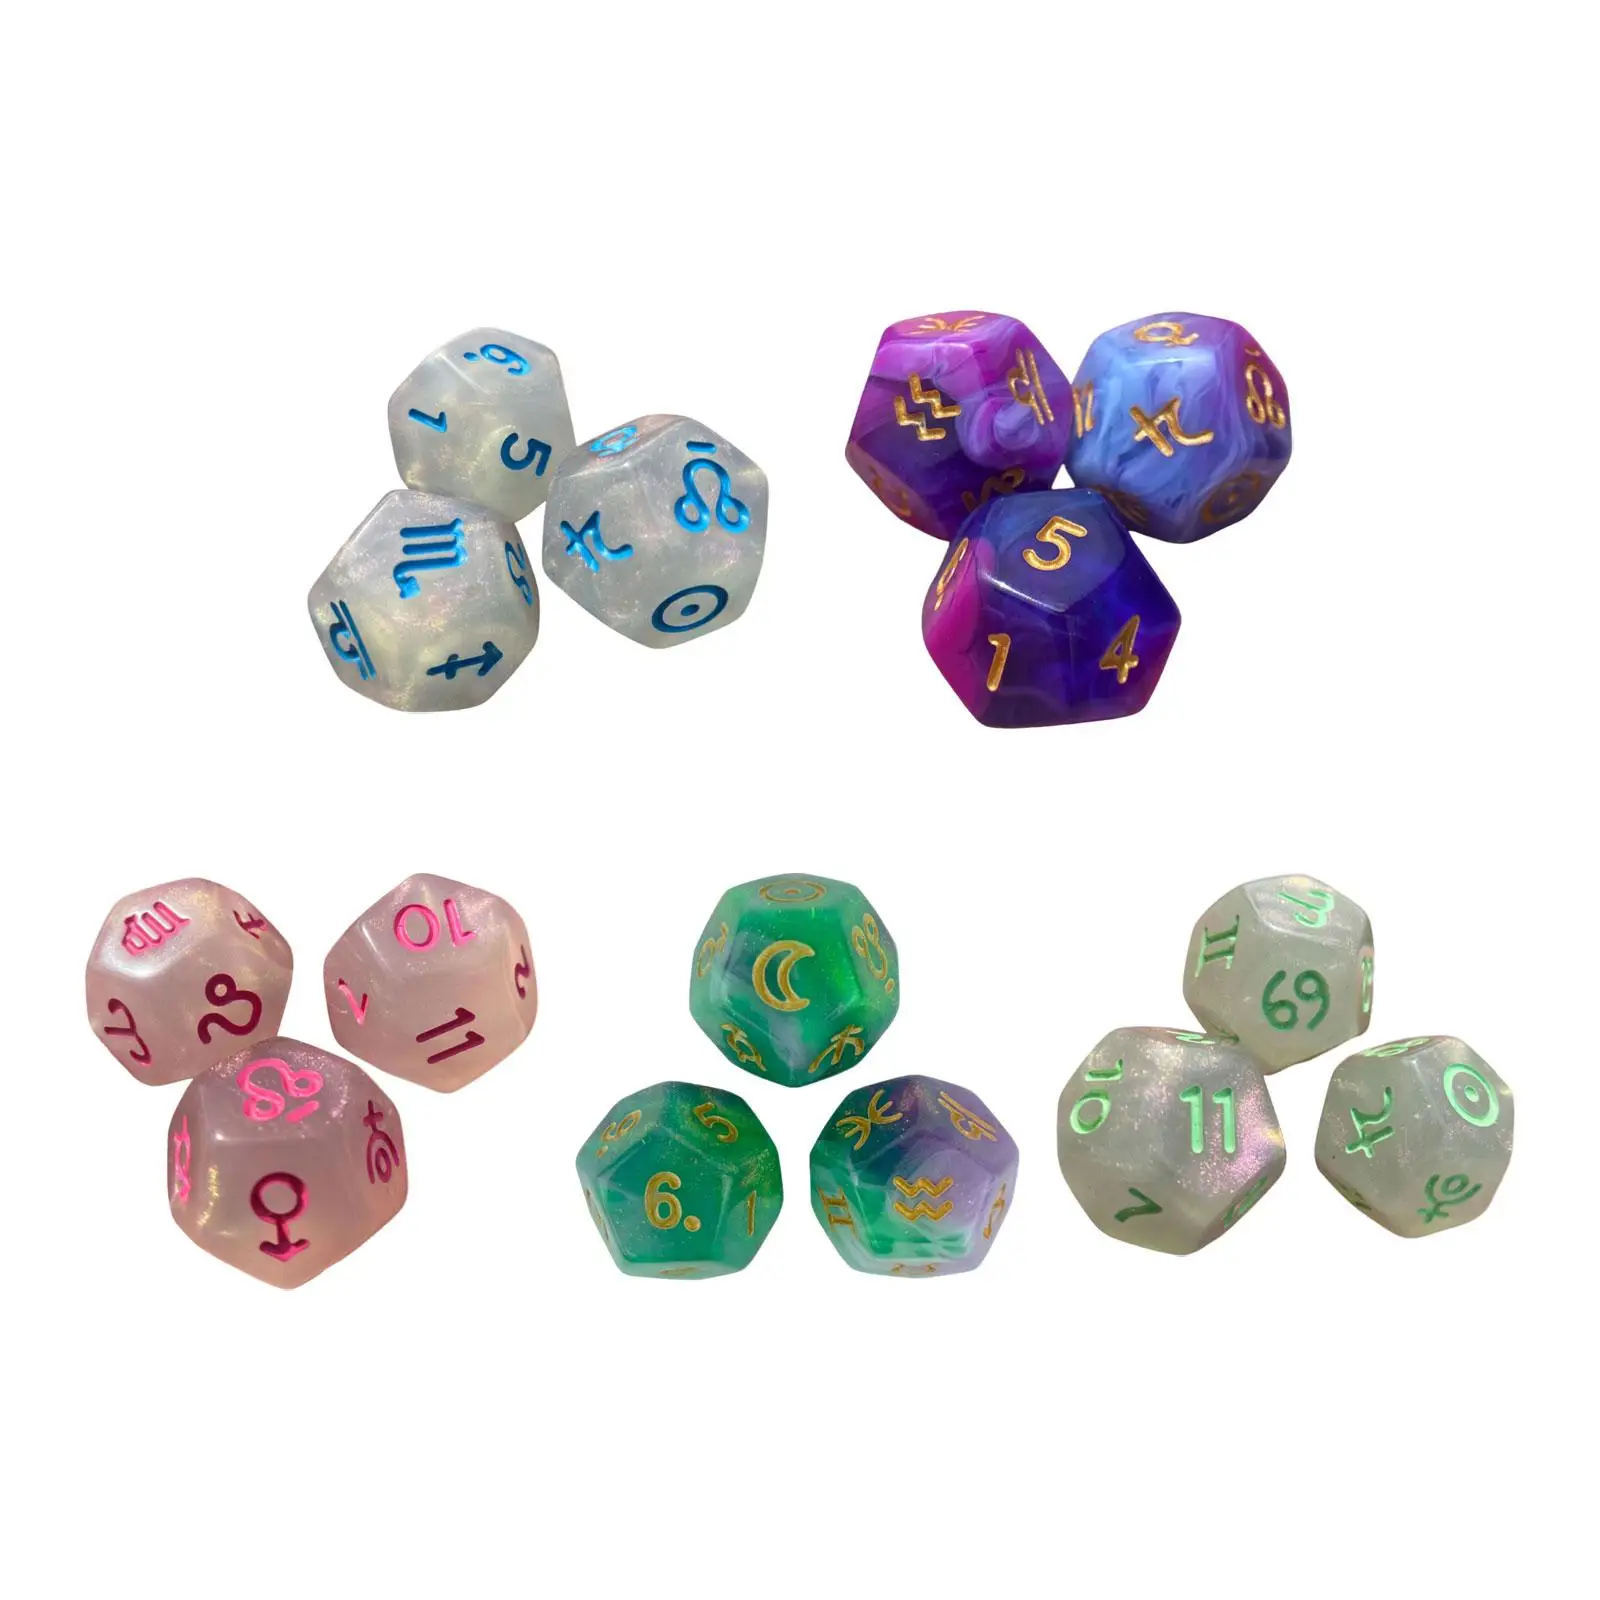 3x Multi Sided Game Dices Math Counting Teaching Aids Party Supplies D12 Constellation Dices for Party Bar Card Games Card Game